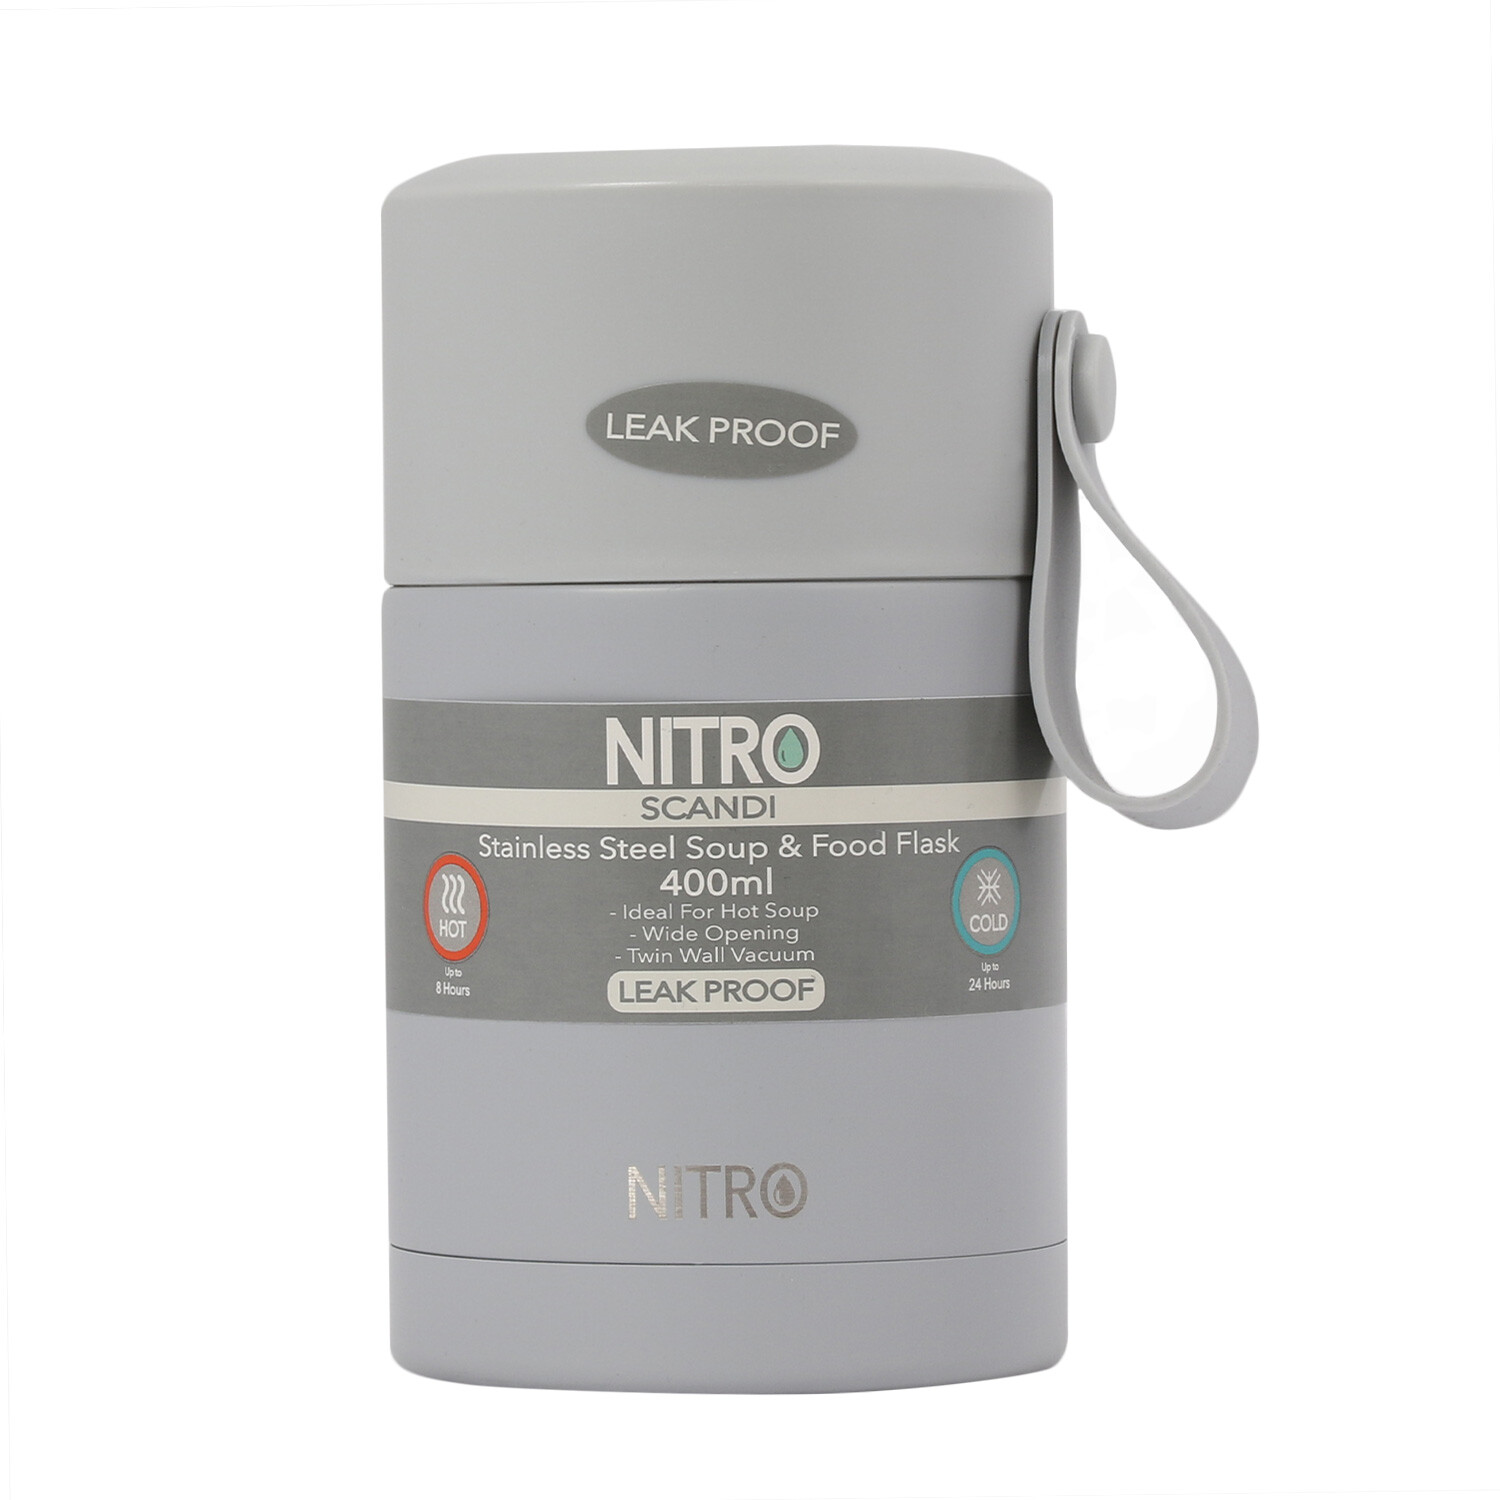 Nitro Scandi 400ml Stainless Steel Soup and Food Flask Image 1